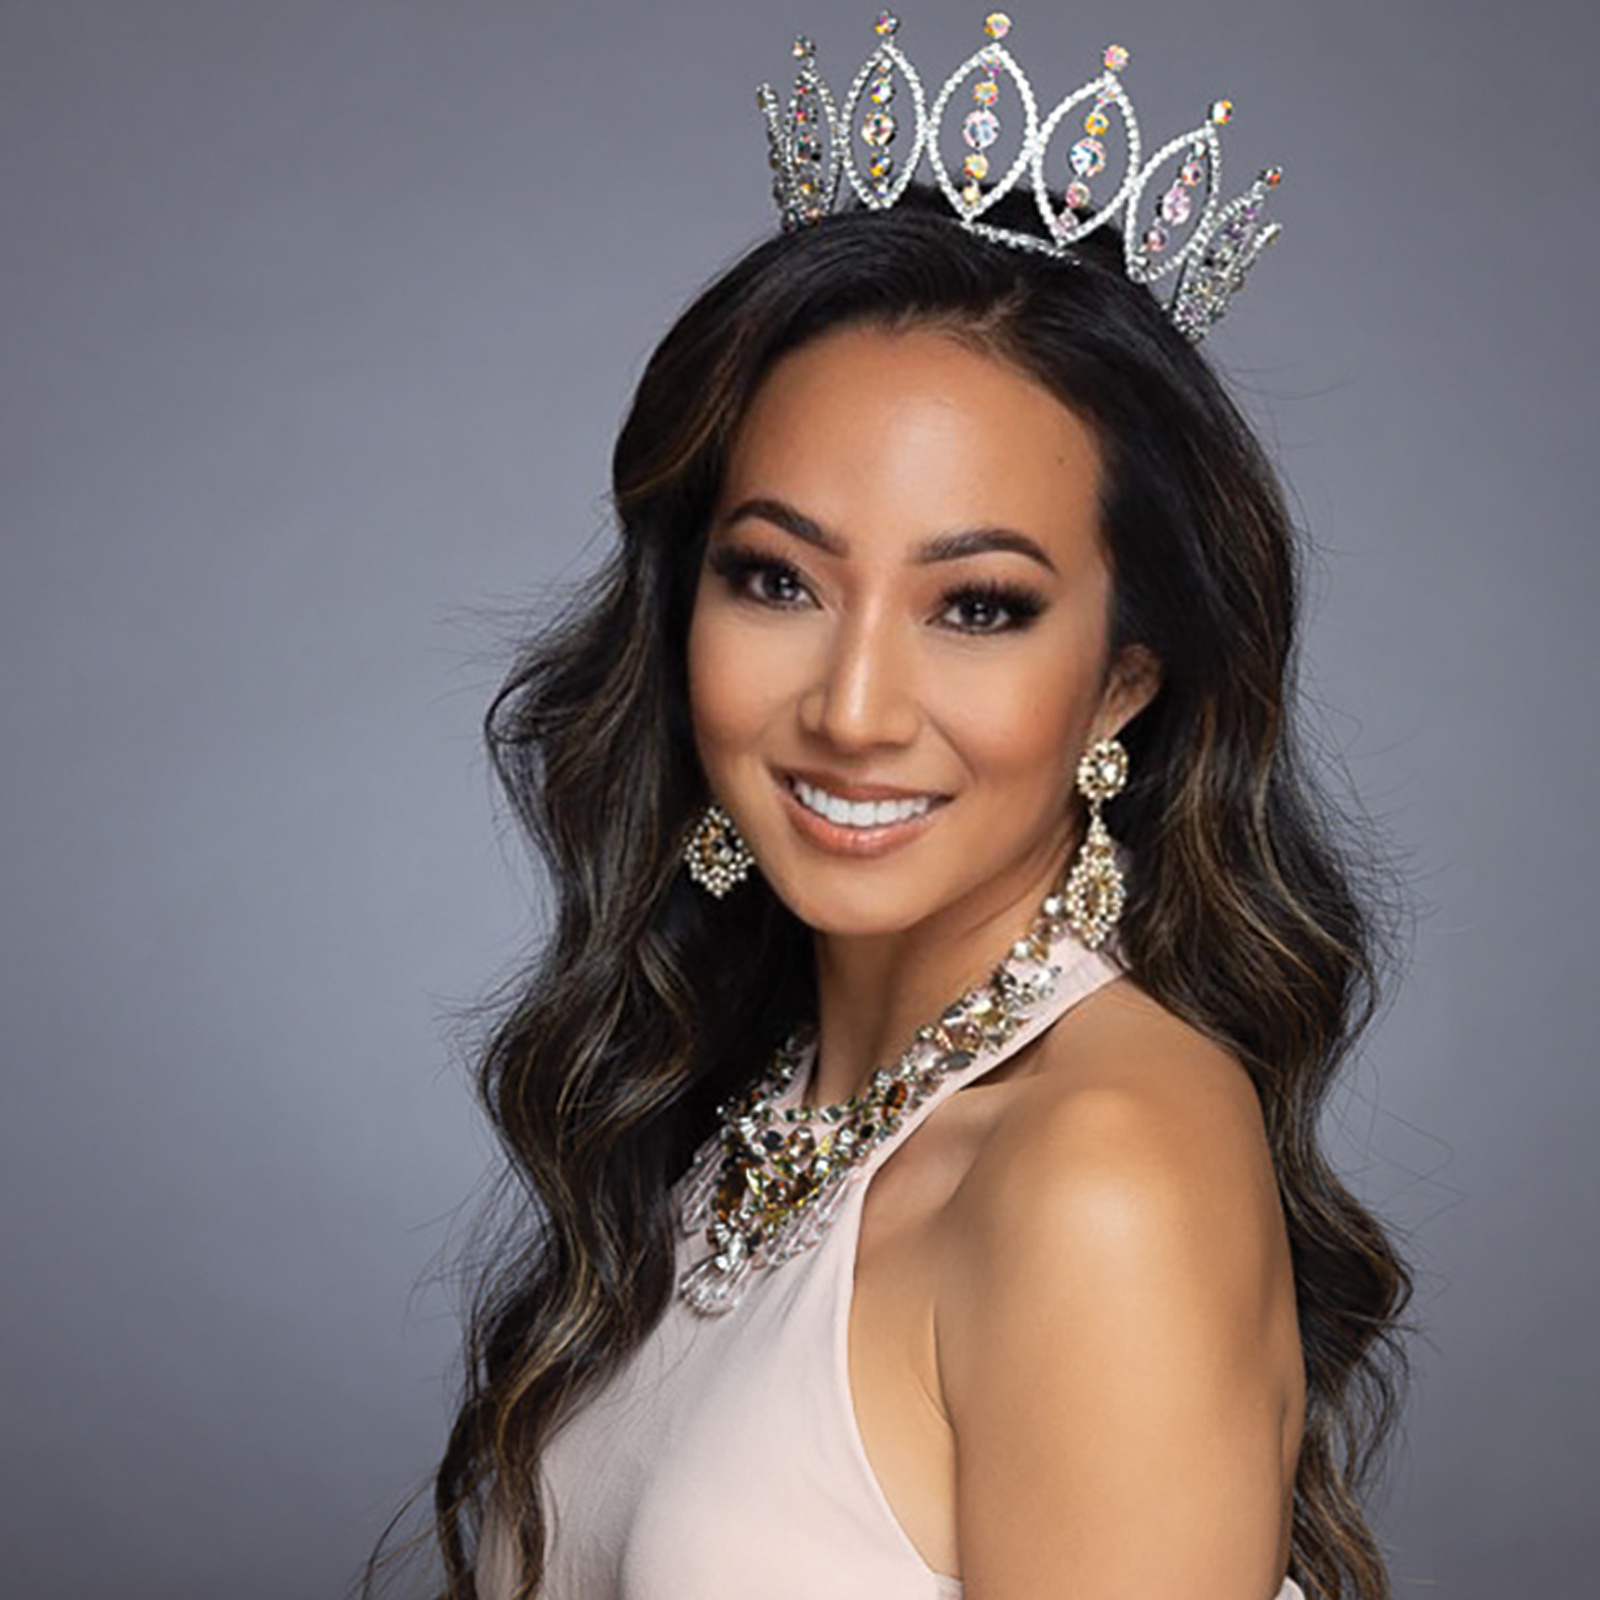 Meet Camille Yano: Pageant Titleholder and Board Member